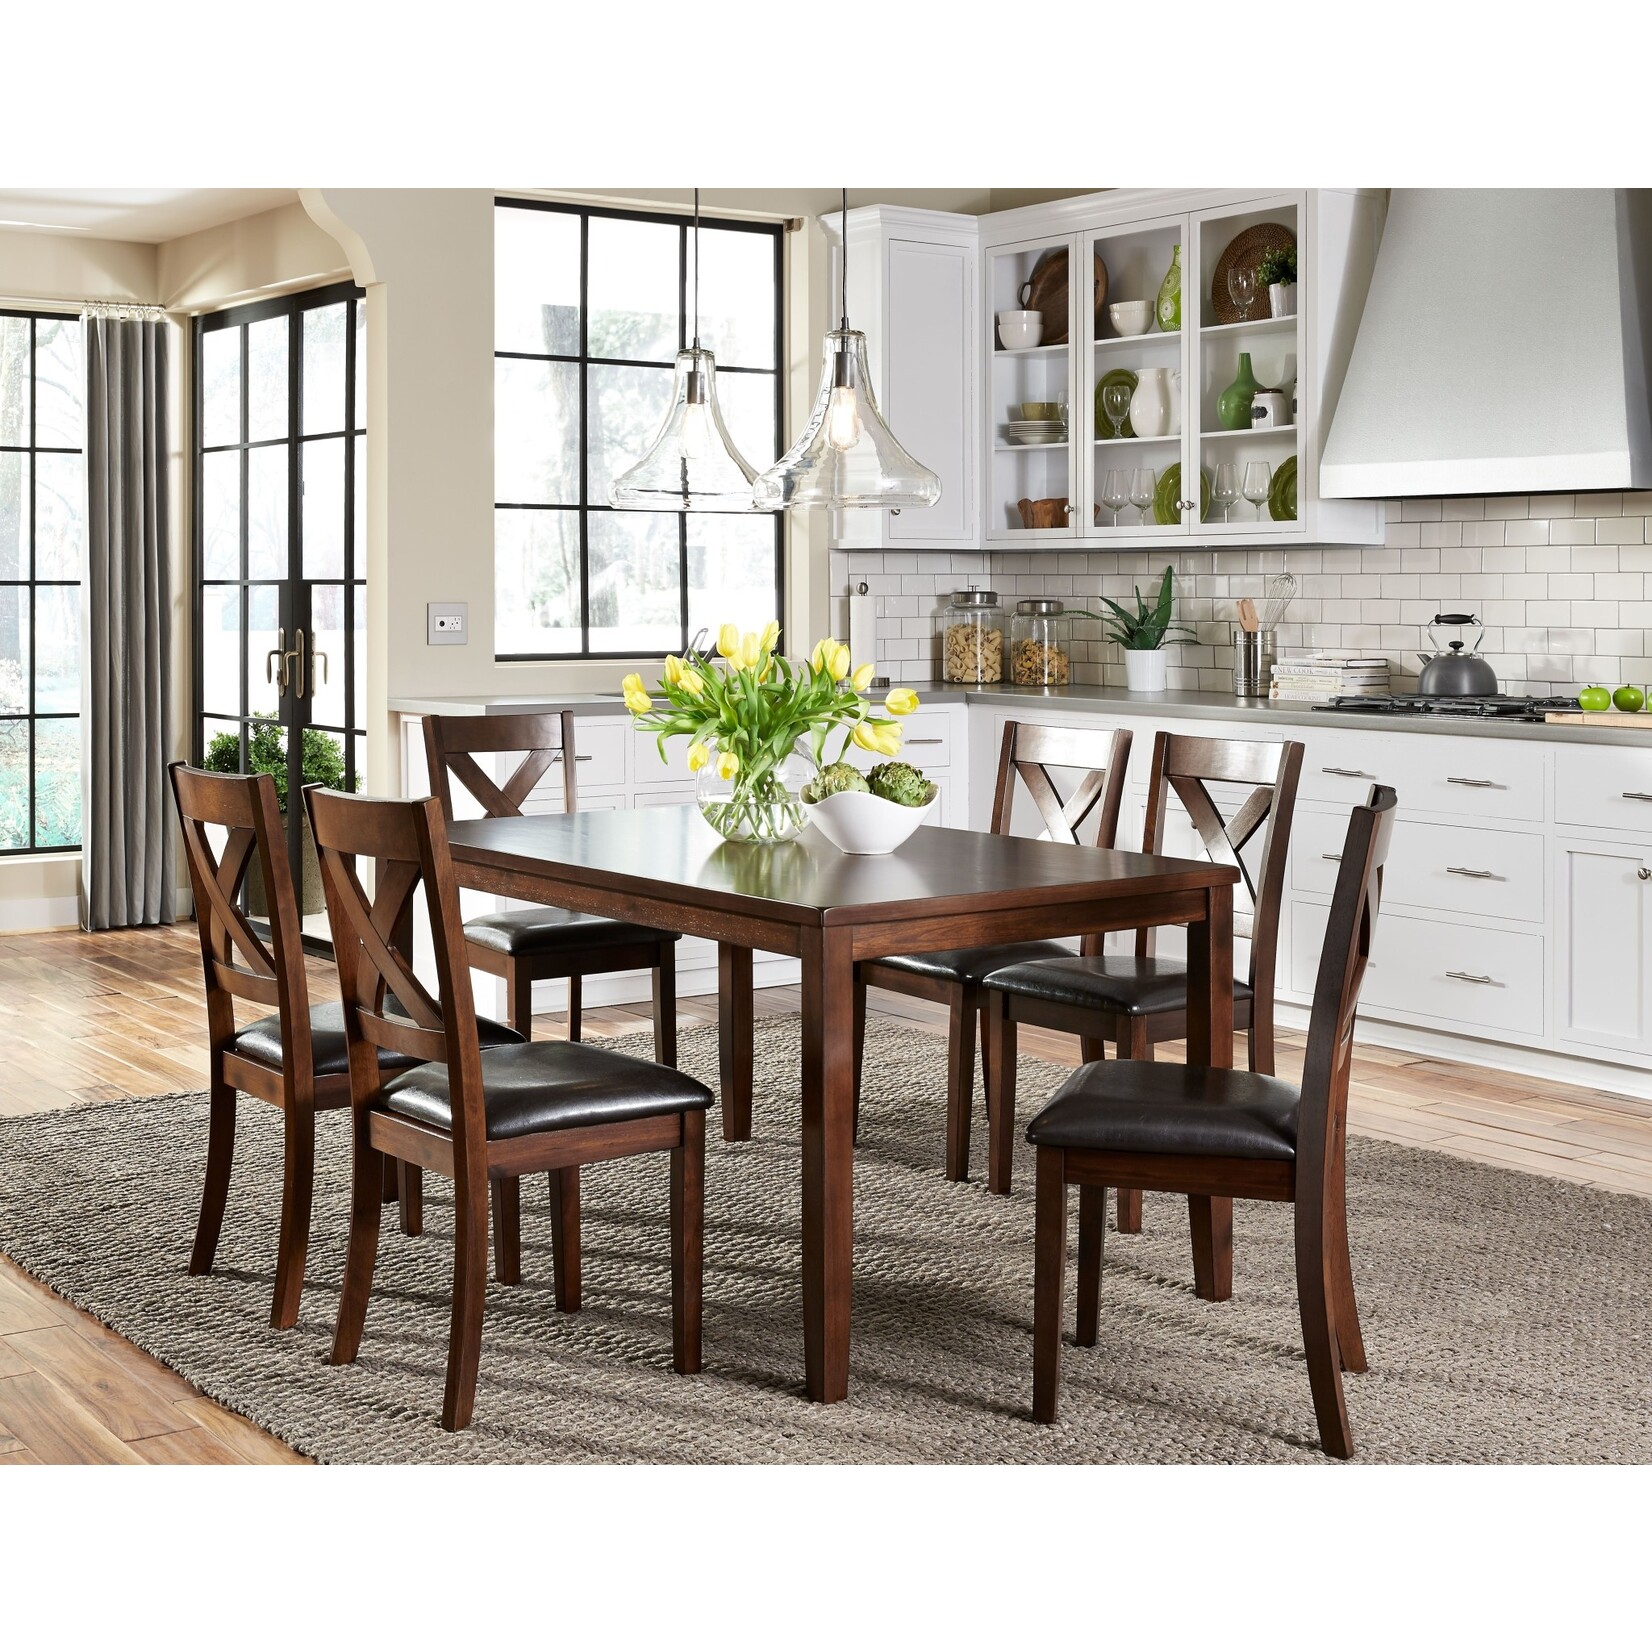 Liberty Furniture Thornton Table and 6 chairs